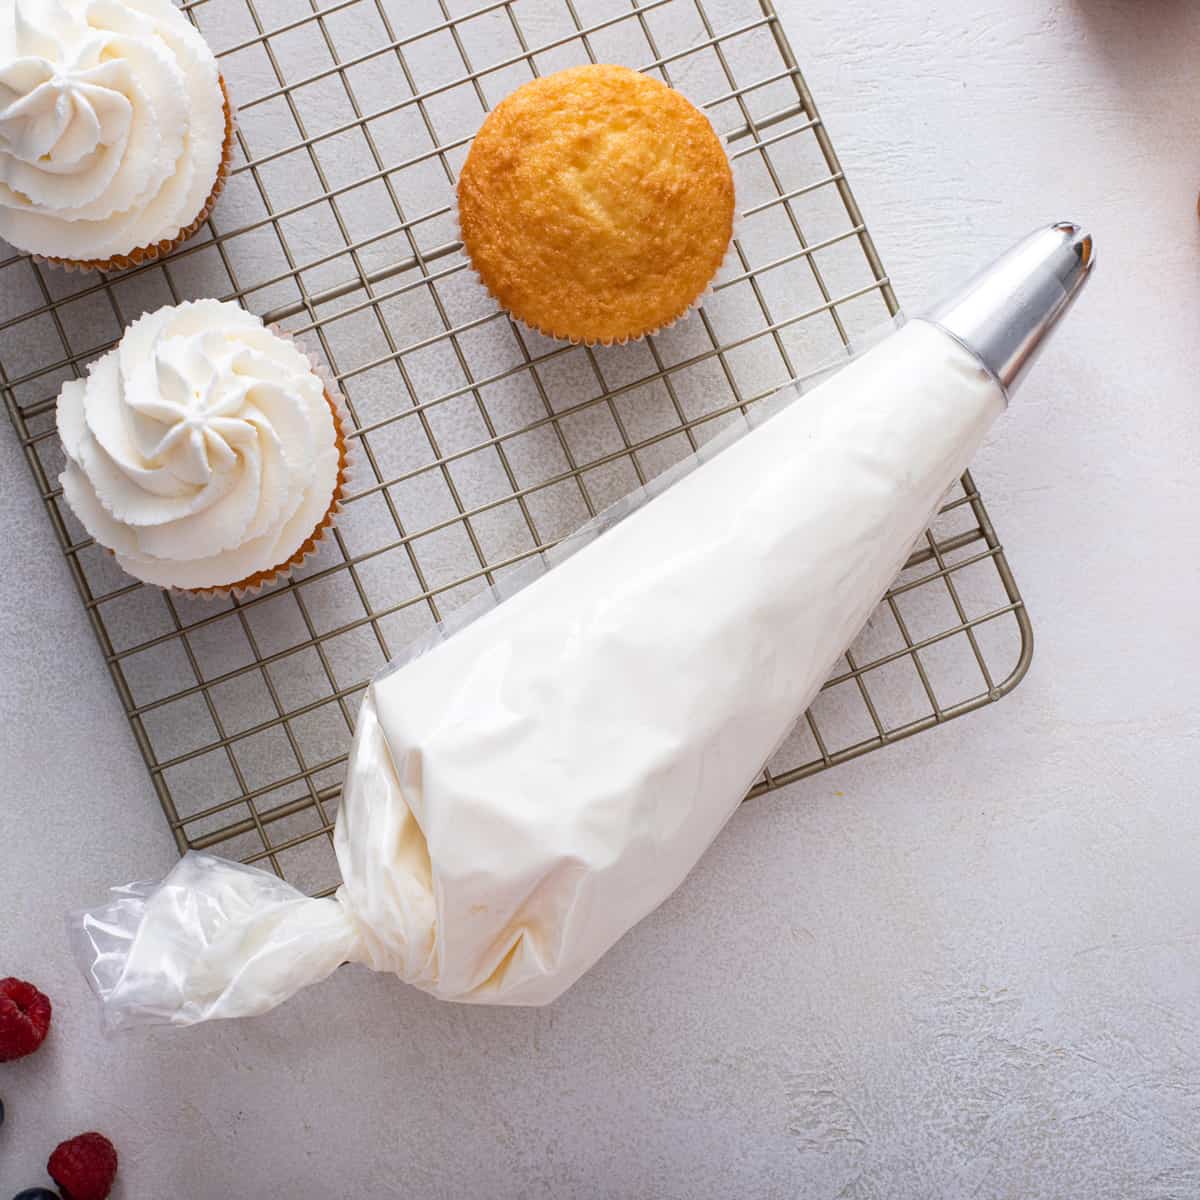 Whipped Cream Frosting - My Baking Addiction